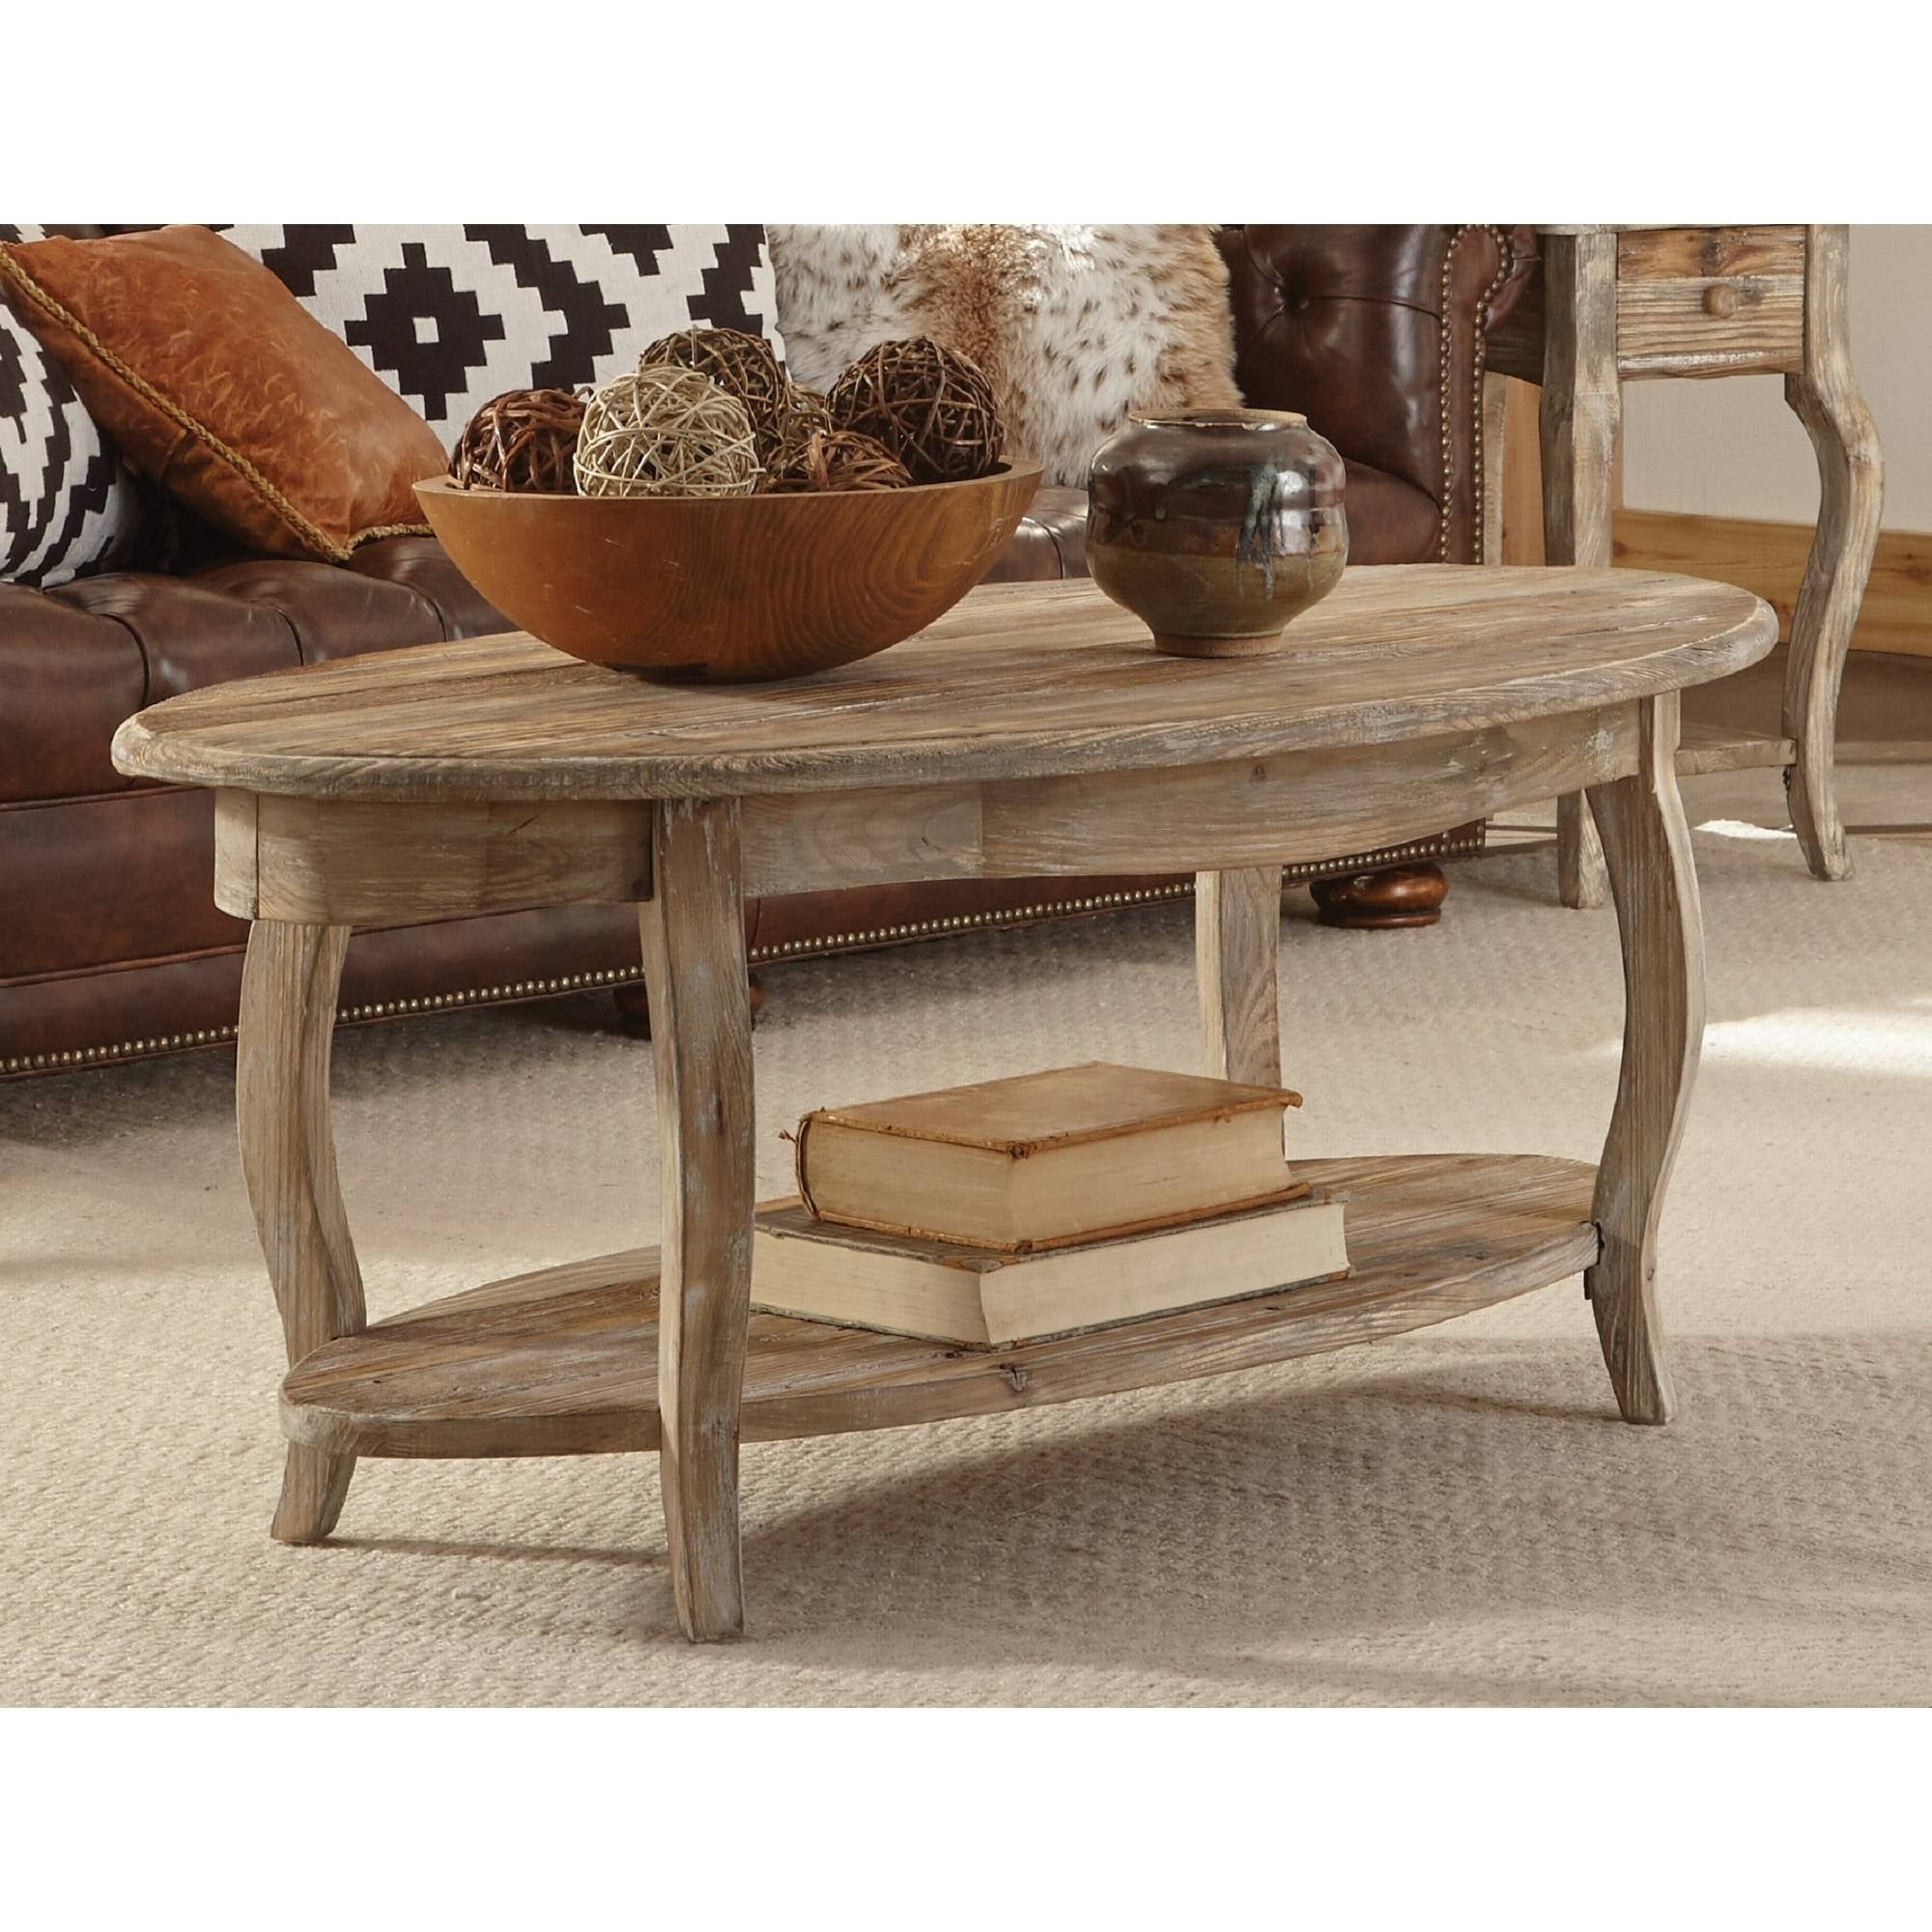 48 Revive Reclaimed Oval Coffee Table Natural - Alaterre Furniture